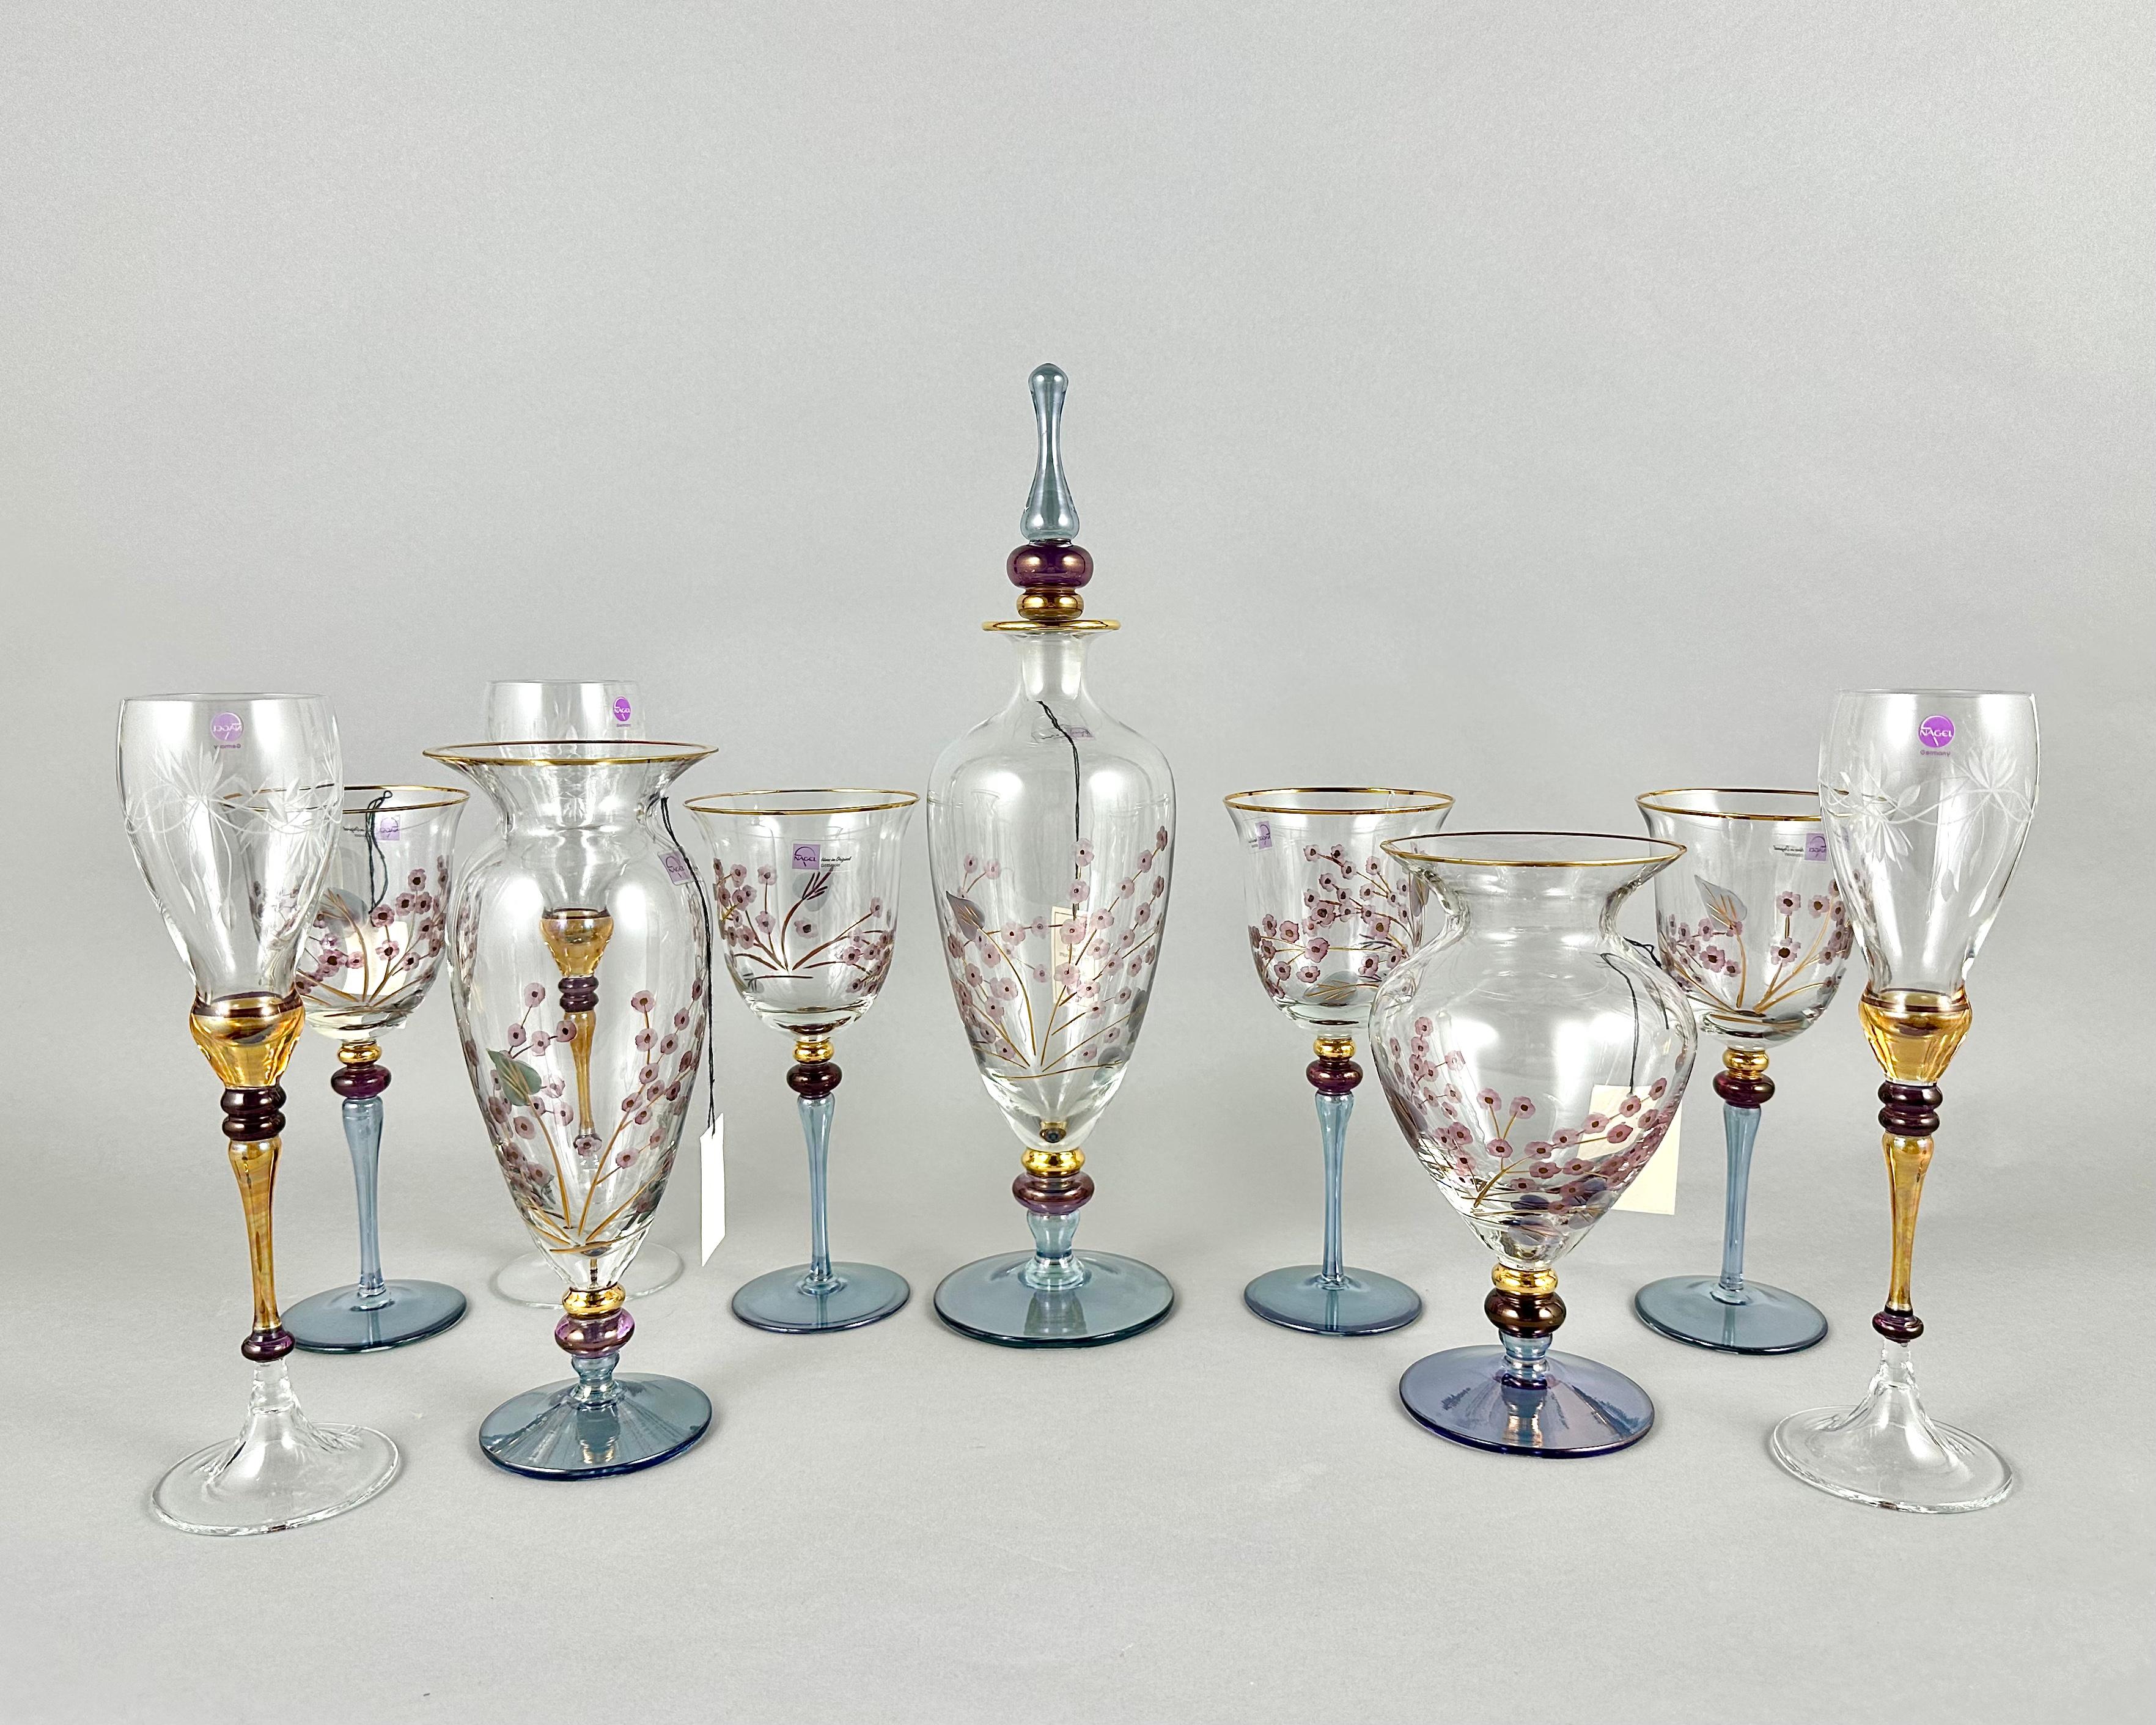 Unique Barware Set of Vintage Wine Champagne Glasses Vases and Decanter Designed by Paul Nagel, Germany, circa 1980s.

Colourless clear glass with hand-painted floral motifs. Gold-plated edge.

Rare vintage barware set from Nagel, a long-established